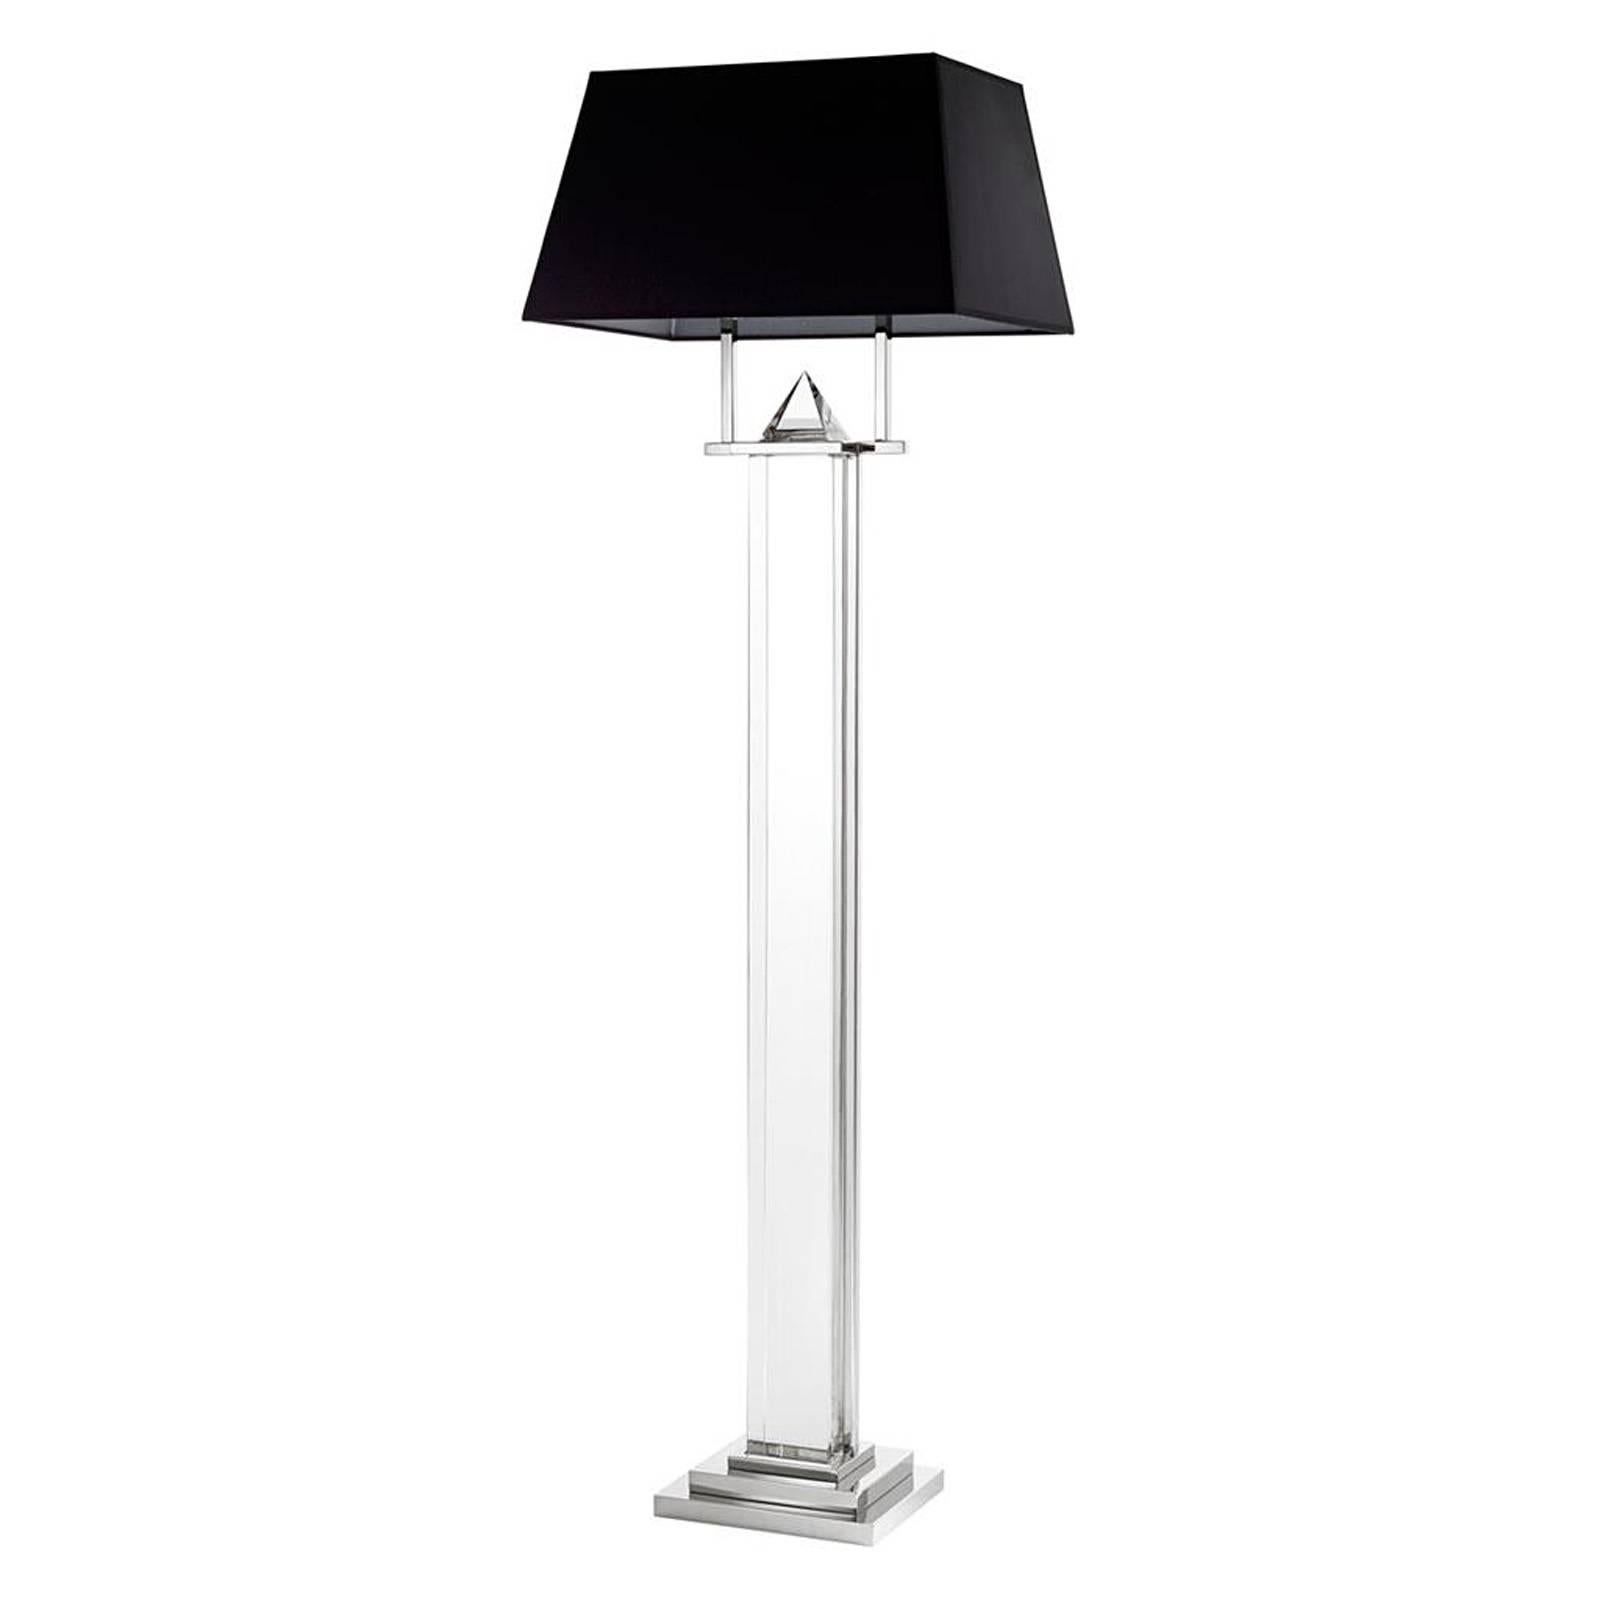 Floor lamp diamant in clear crystal glass
and polished nickel finish, on nickel base with 
black shade. Two lamp holder type E27, 60 watt,
220-240 volt. Subtle and elegant piece.
